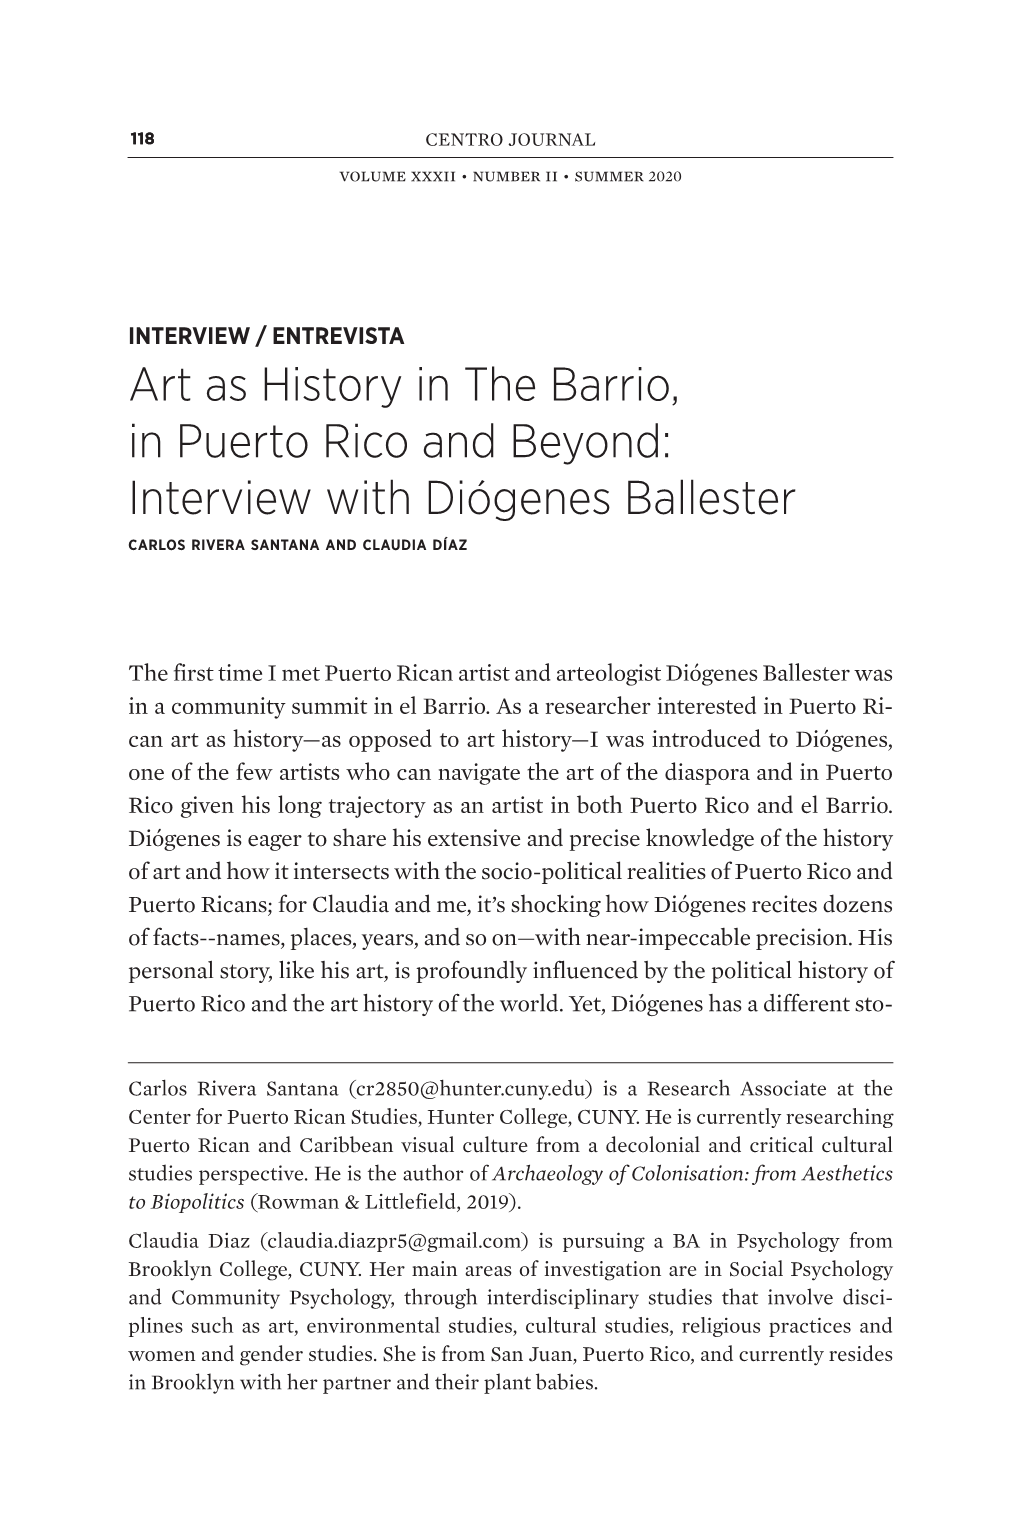 Art As History in the Barrio, in Puerto Rico and Beyond: Interview with Diógenes Ballester Carlos Rivera Santana and Claudia Díaz